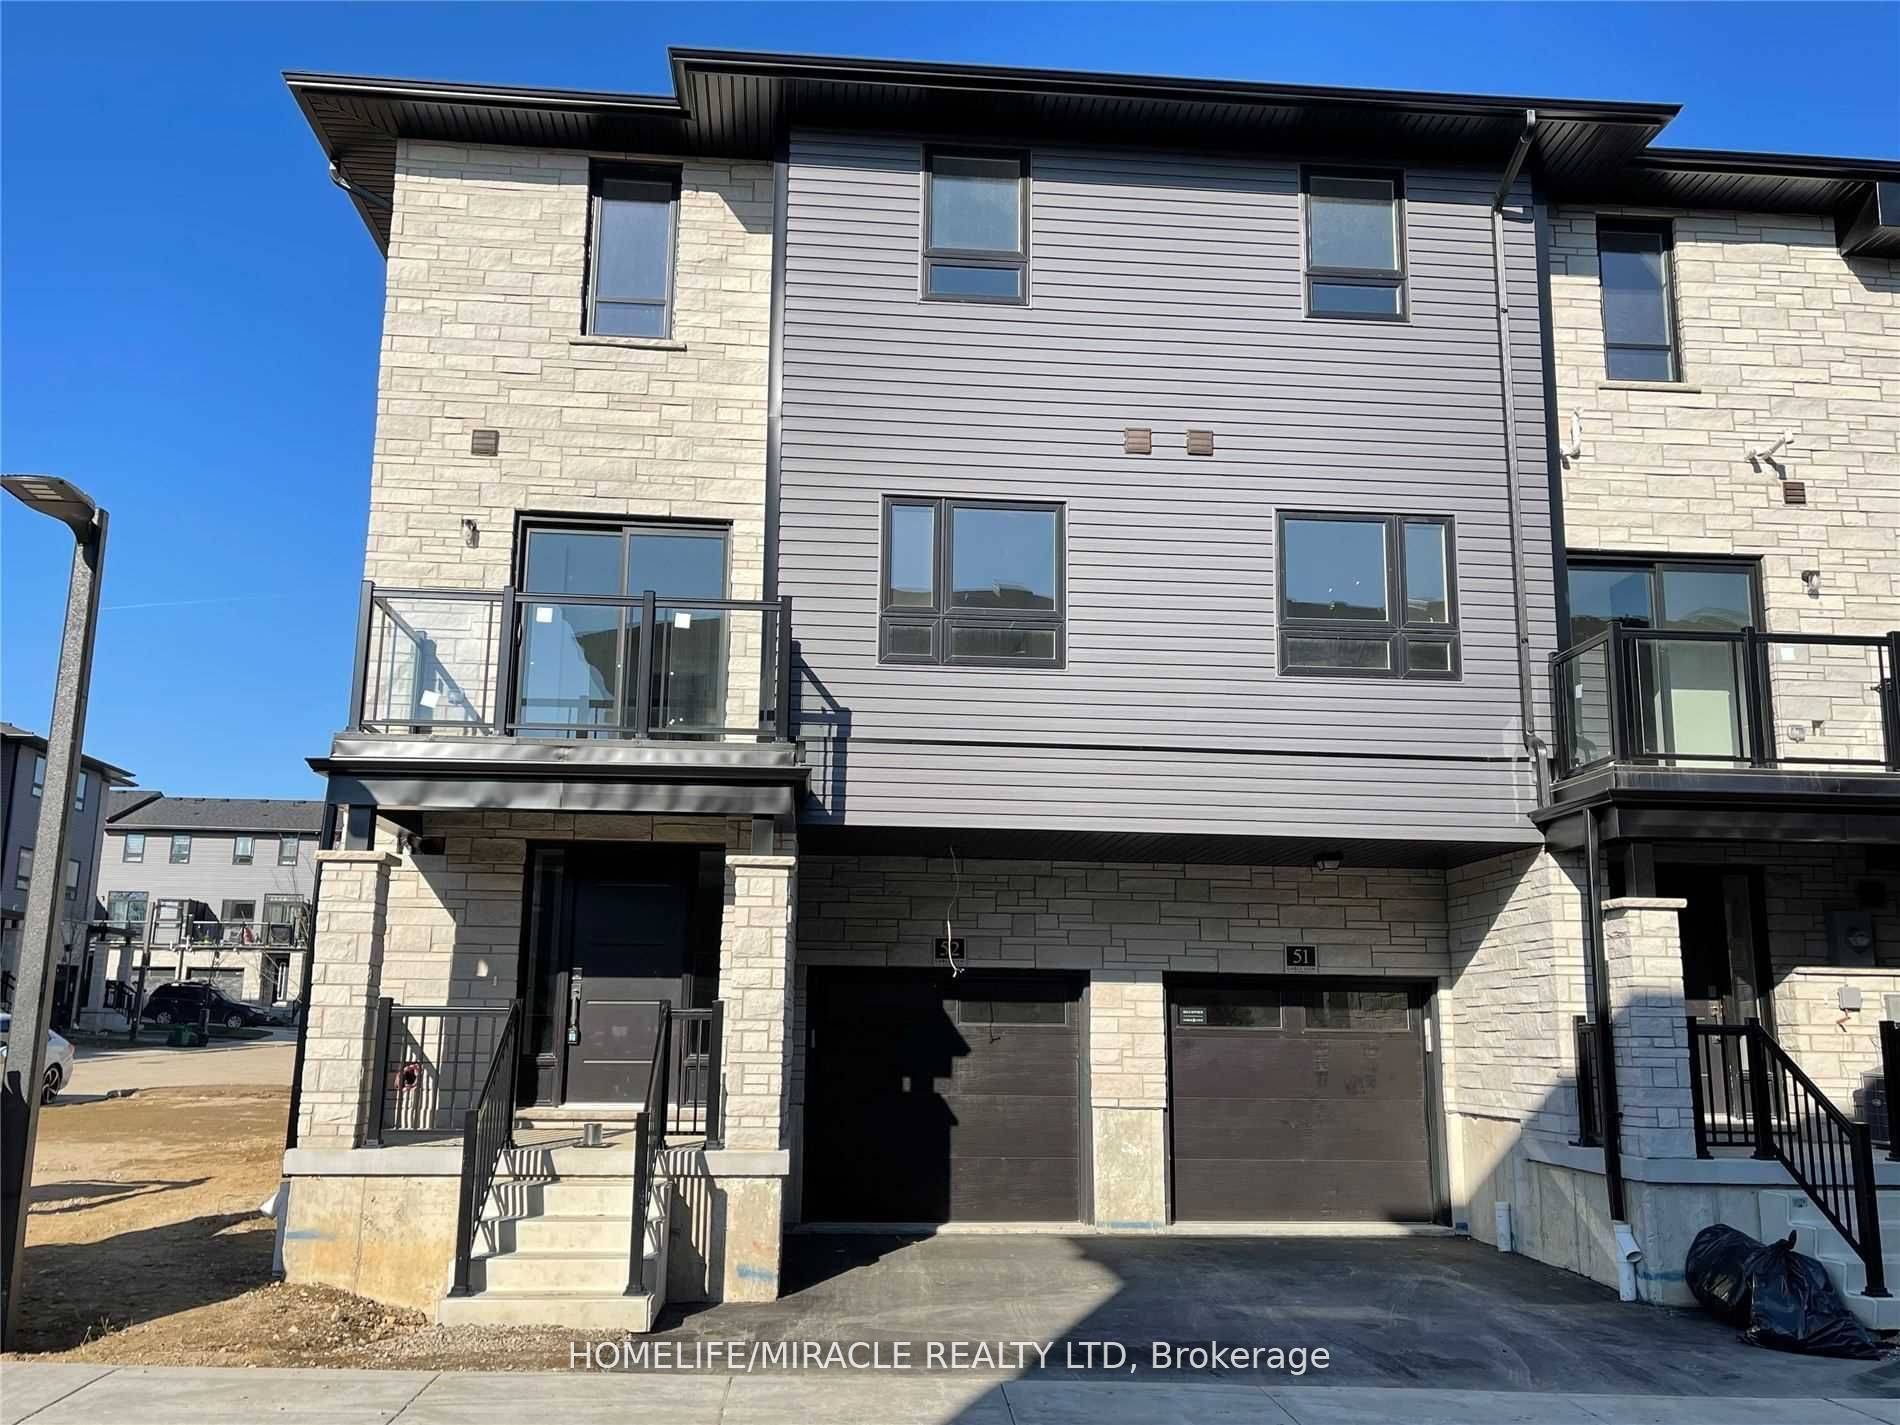 Gorgeous End Unit Townhouse With Modern Concept Layout offers 3 Bedroom 2.